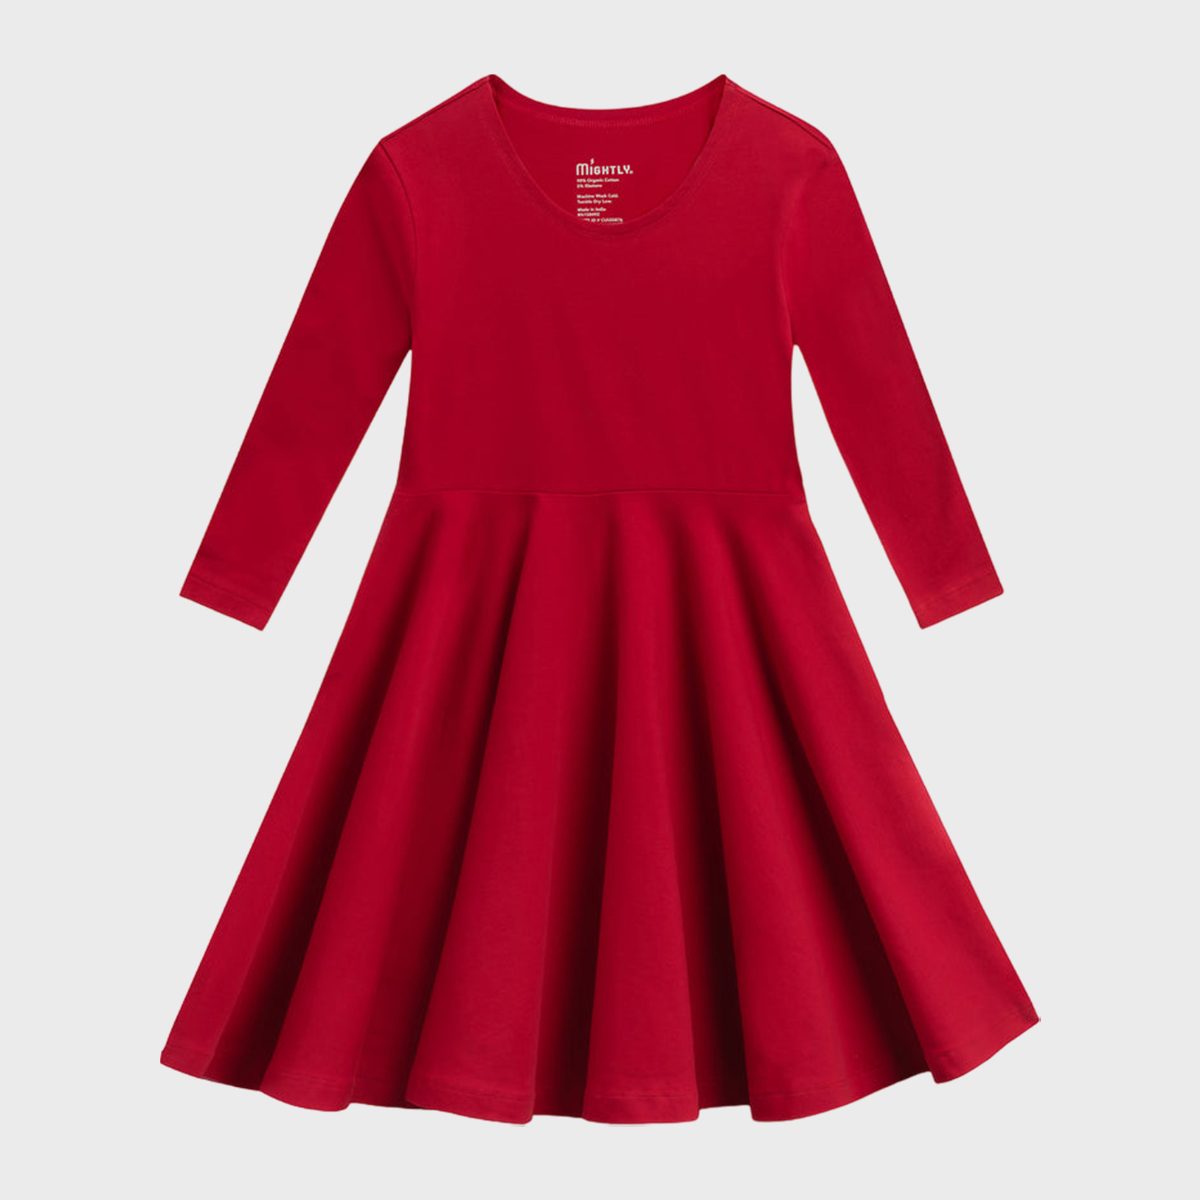 <p>Girls who love dresses will be thrilled when they receive this <a href="https://www.mightly.com/collections/girls-dresses/products/girls-dress-organic-cotton-3-4-sleeve-twirl-core-colors" rel="noopener noreferrer">twirl dress</a> from Mightly. Made from thick, organic cotton, this dress is comfortable enough for everyday wear and has a twirl factor that she'll go crazy for. It's available in sizes 2T through 14 and comes in a variety of solid colors that serve as the perfect backdrop for her favorite <a href="https://www.rd.com/list/summer-accessories-amazon/">accessories</a>.</p> <p class="listicle-page__cta-button-shop"><a class="shop-btn" href="https://www.mightly.com/collections/girls-dresses/products/girls-dress-organic-cotton-3-4-sleeve-twirl-core-colors">Shop Now</a></p>